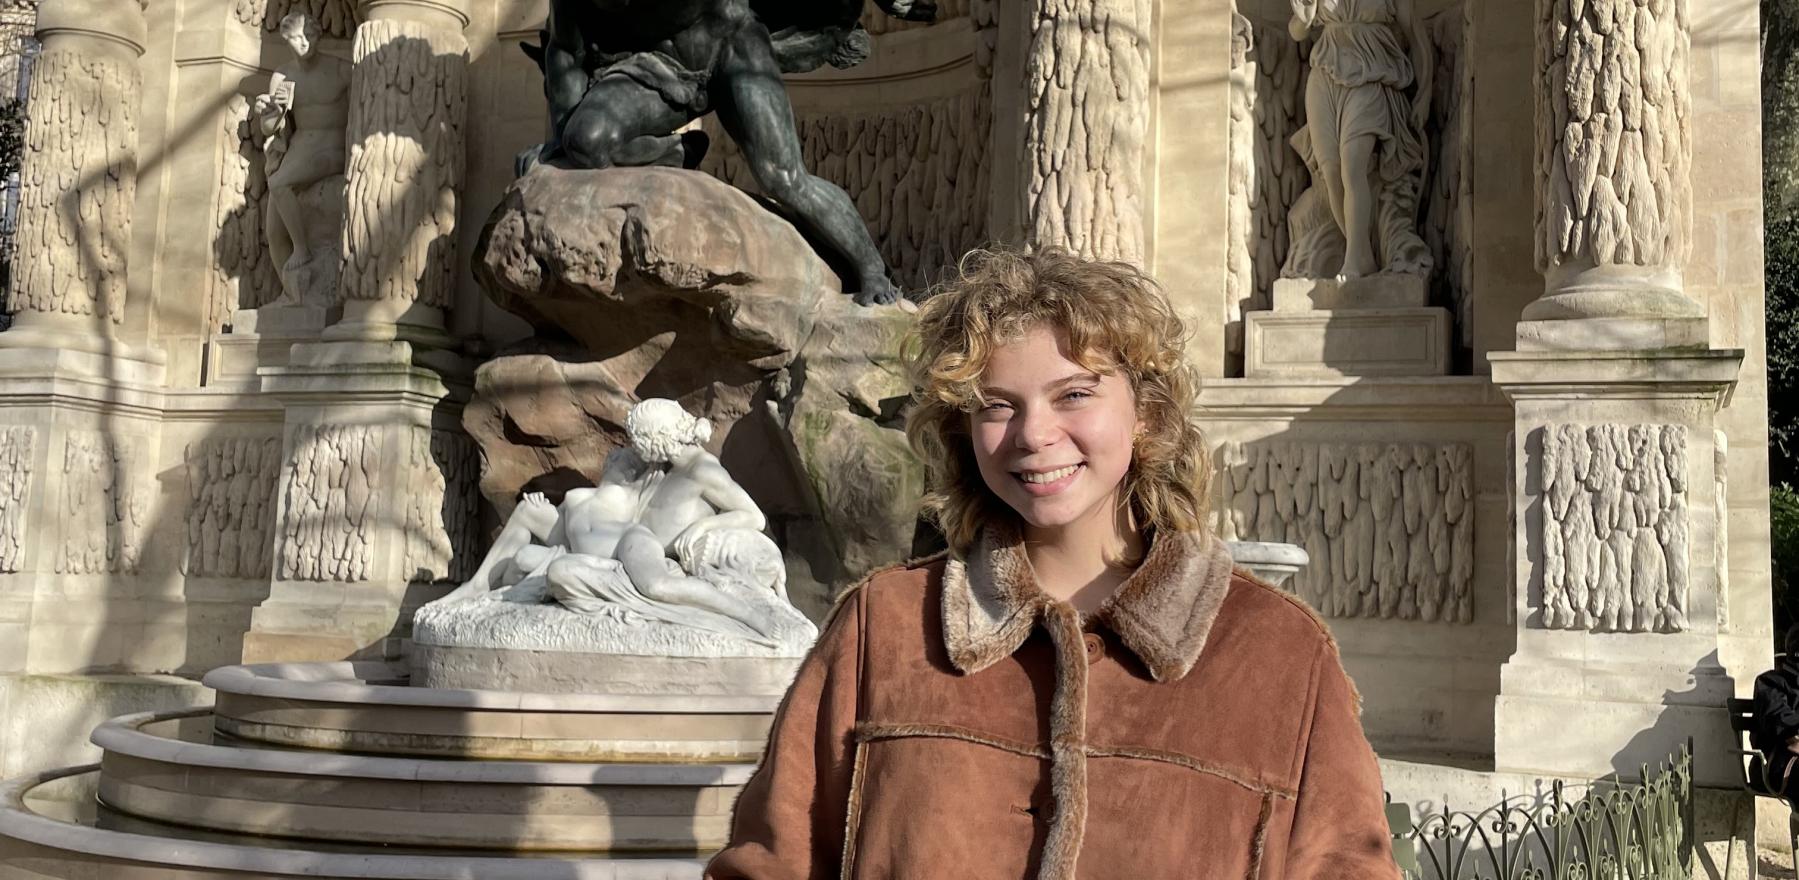 Liana Secondino standing in front of a statue in Paris and smiling for the camera